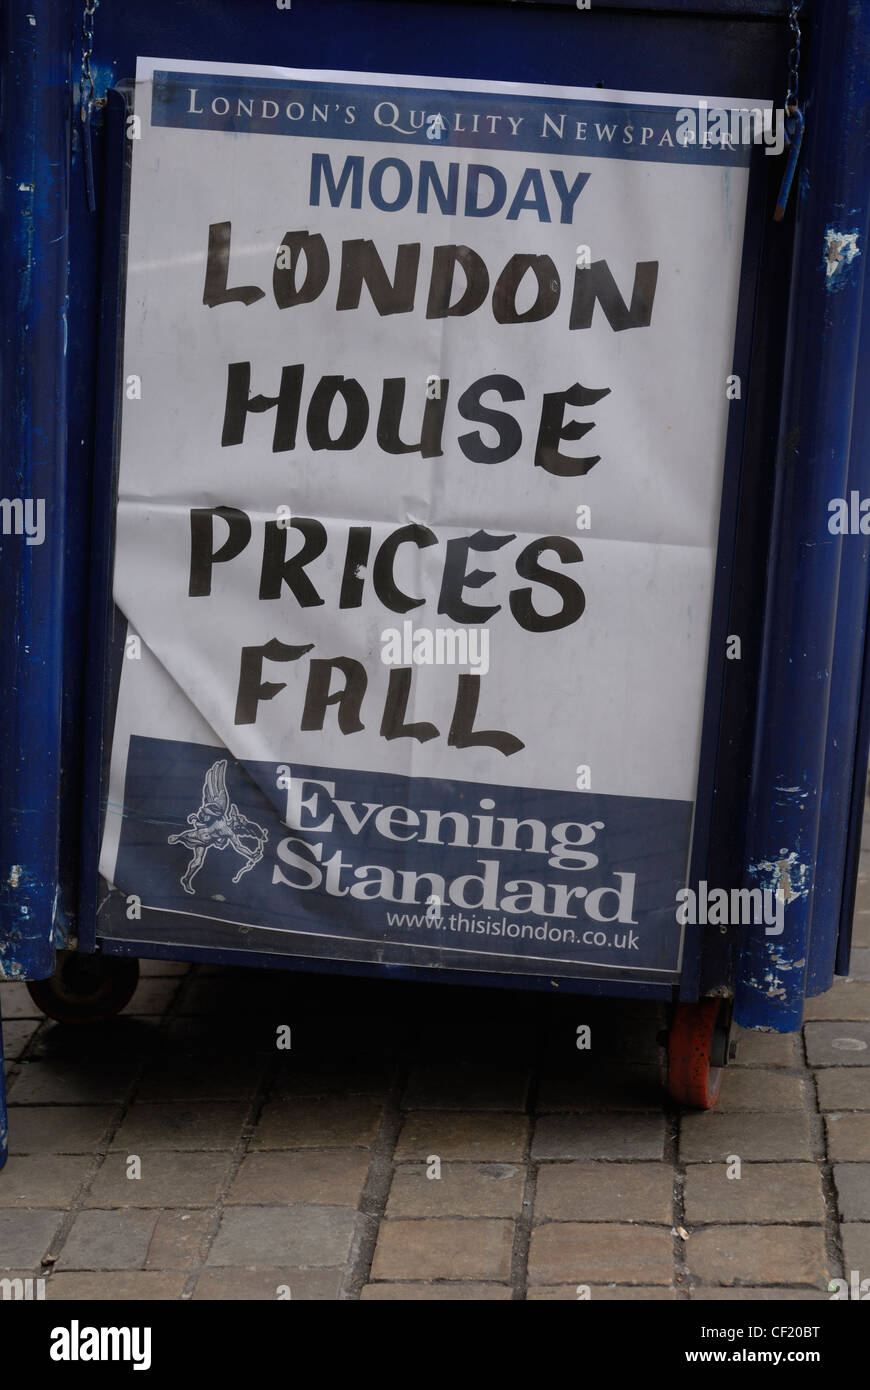 A newspaper hoarding for the London Evening Standard. Stock Photo